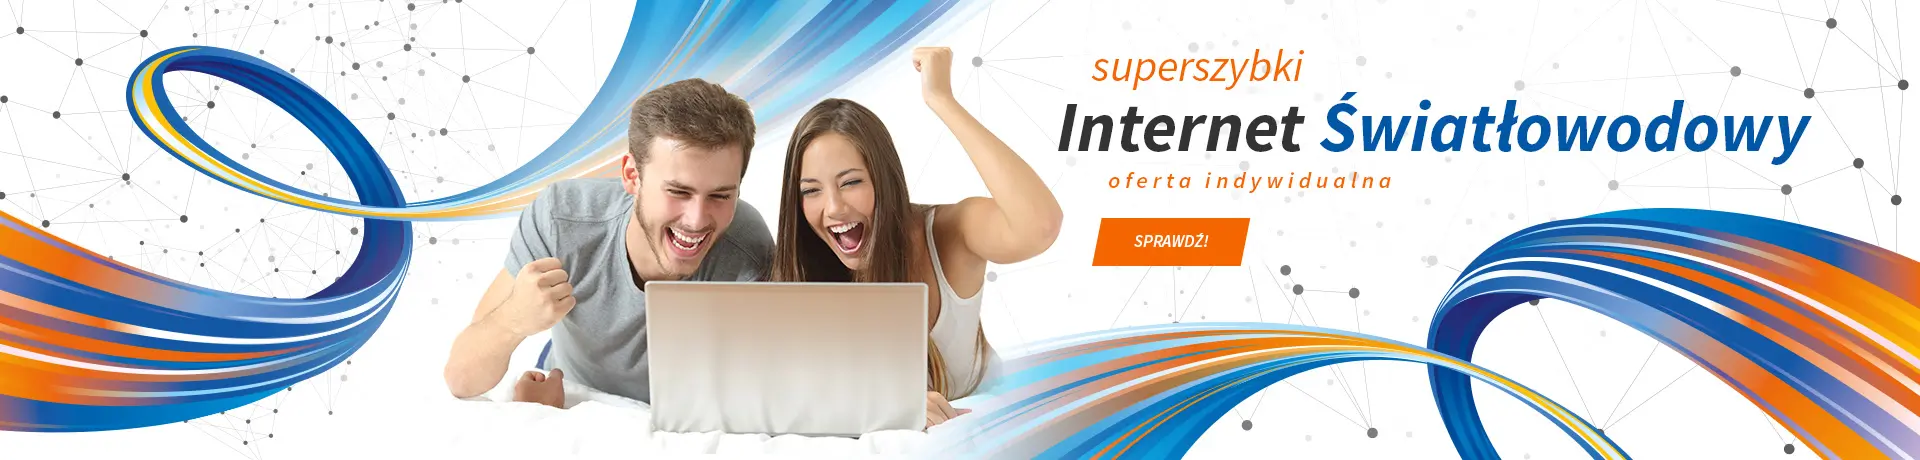 Banner showcasing a jubilant couple lying down and looking at a laptop with excited expressions, next to bold text reading 'Superszybki Internet Światłowodowy - oferta indywidualna' with a call-to-action button that says 'SPRAWDŹ!' and dynamic, swirling lines in blue and orange representing high-speed fiber-optic internet connectivity.